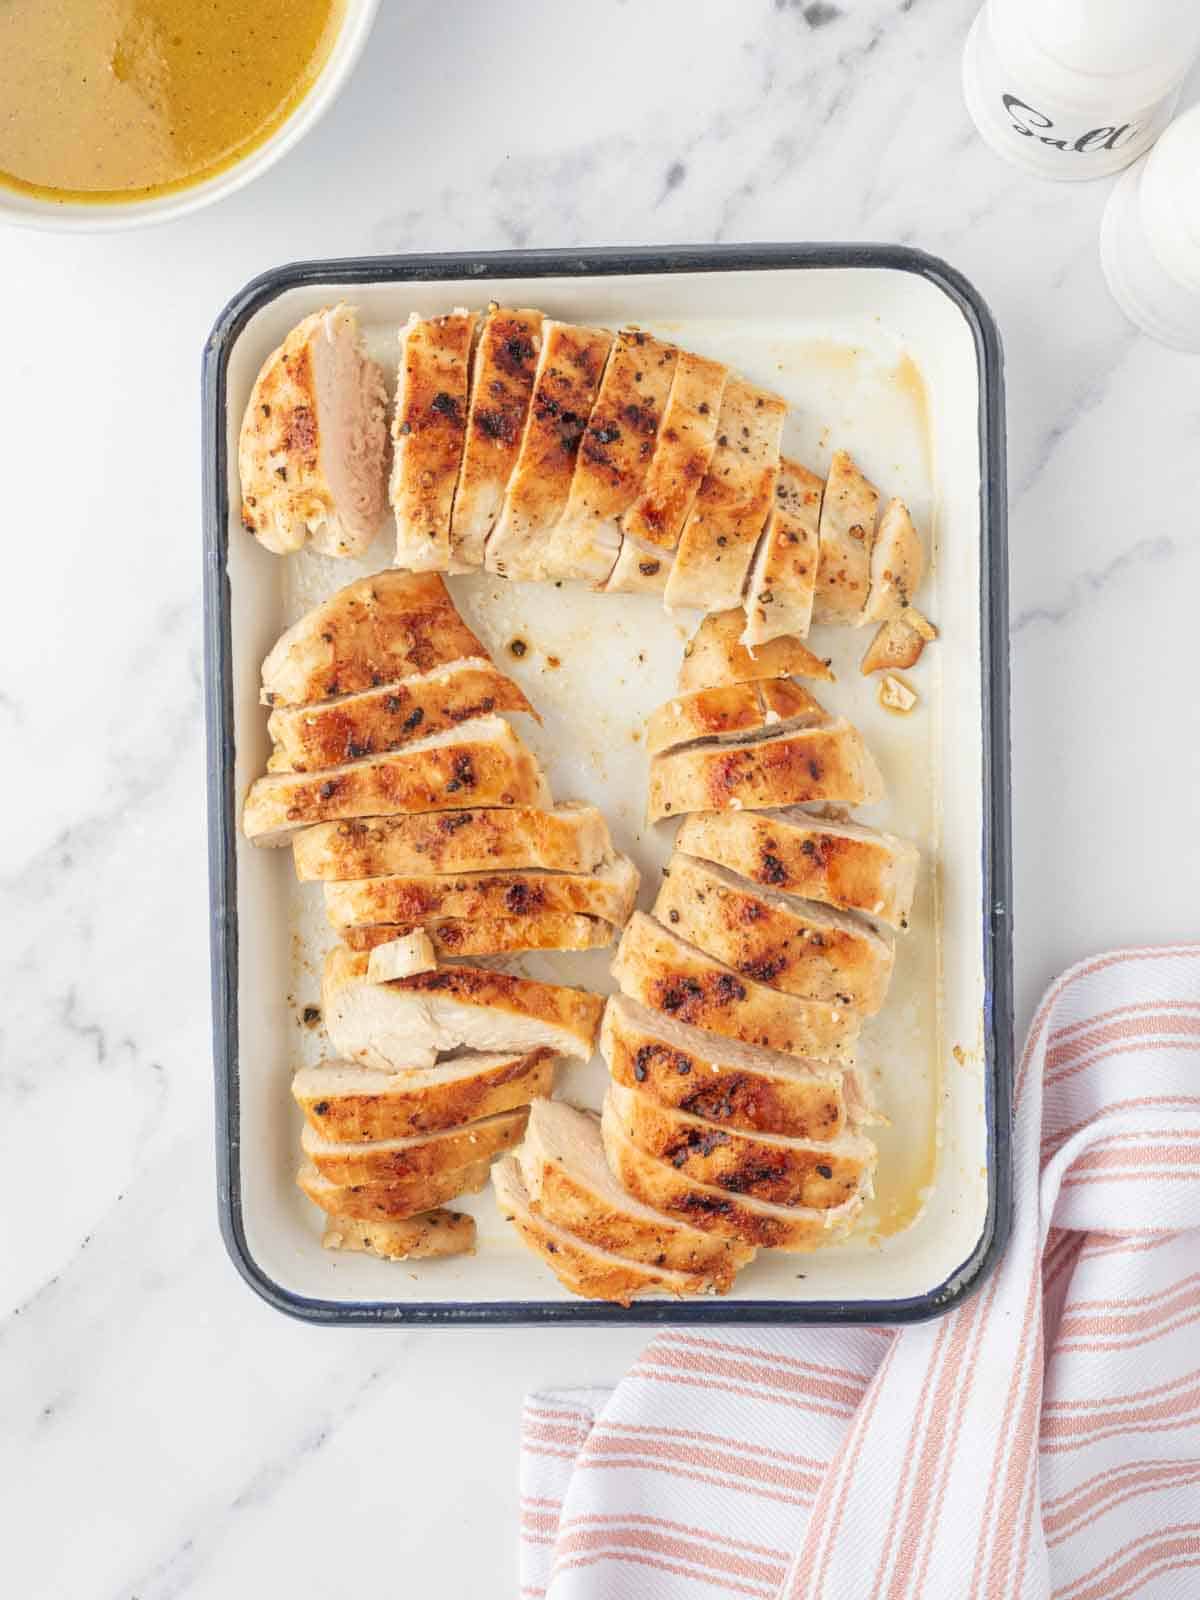 Grilled chicken breasts sliced on a platter.